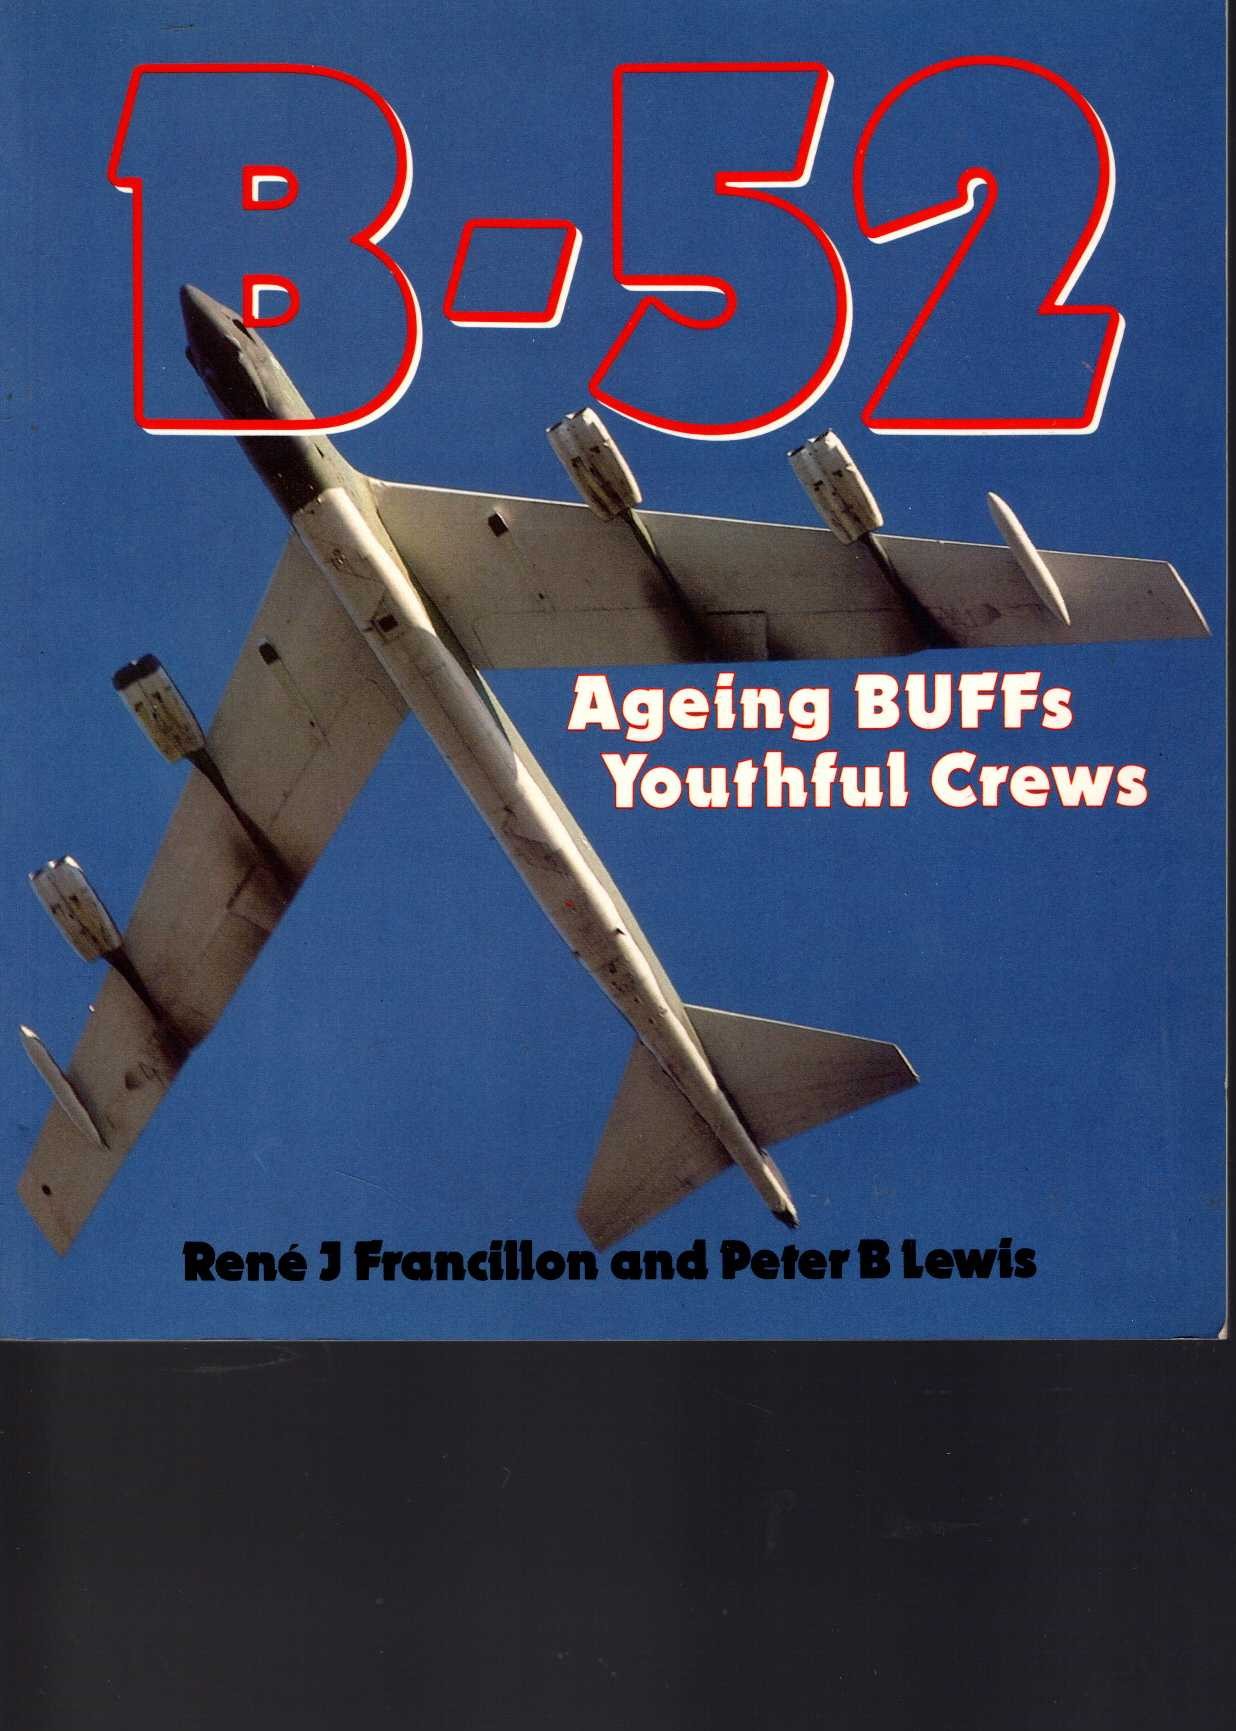 B-52 front book cover image